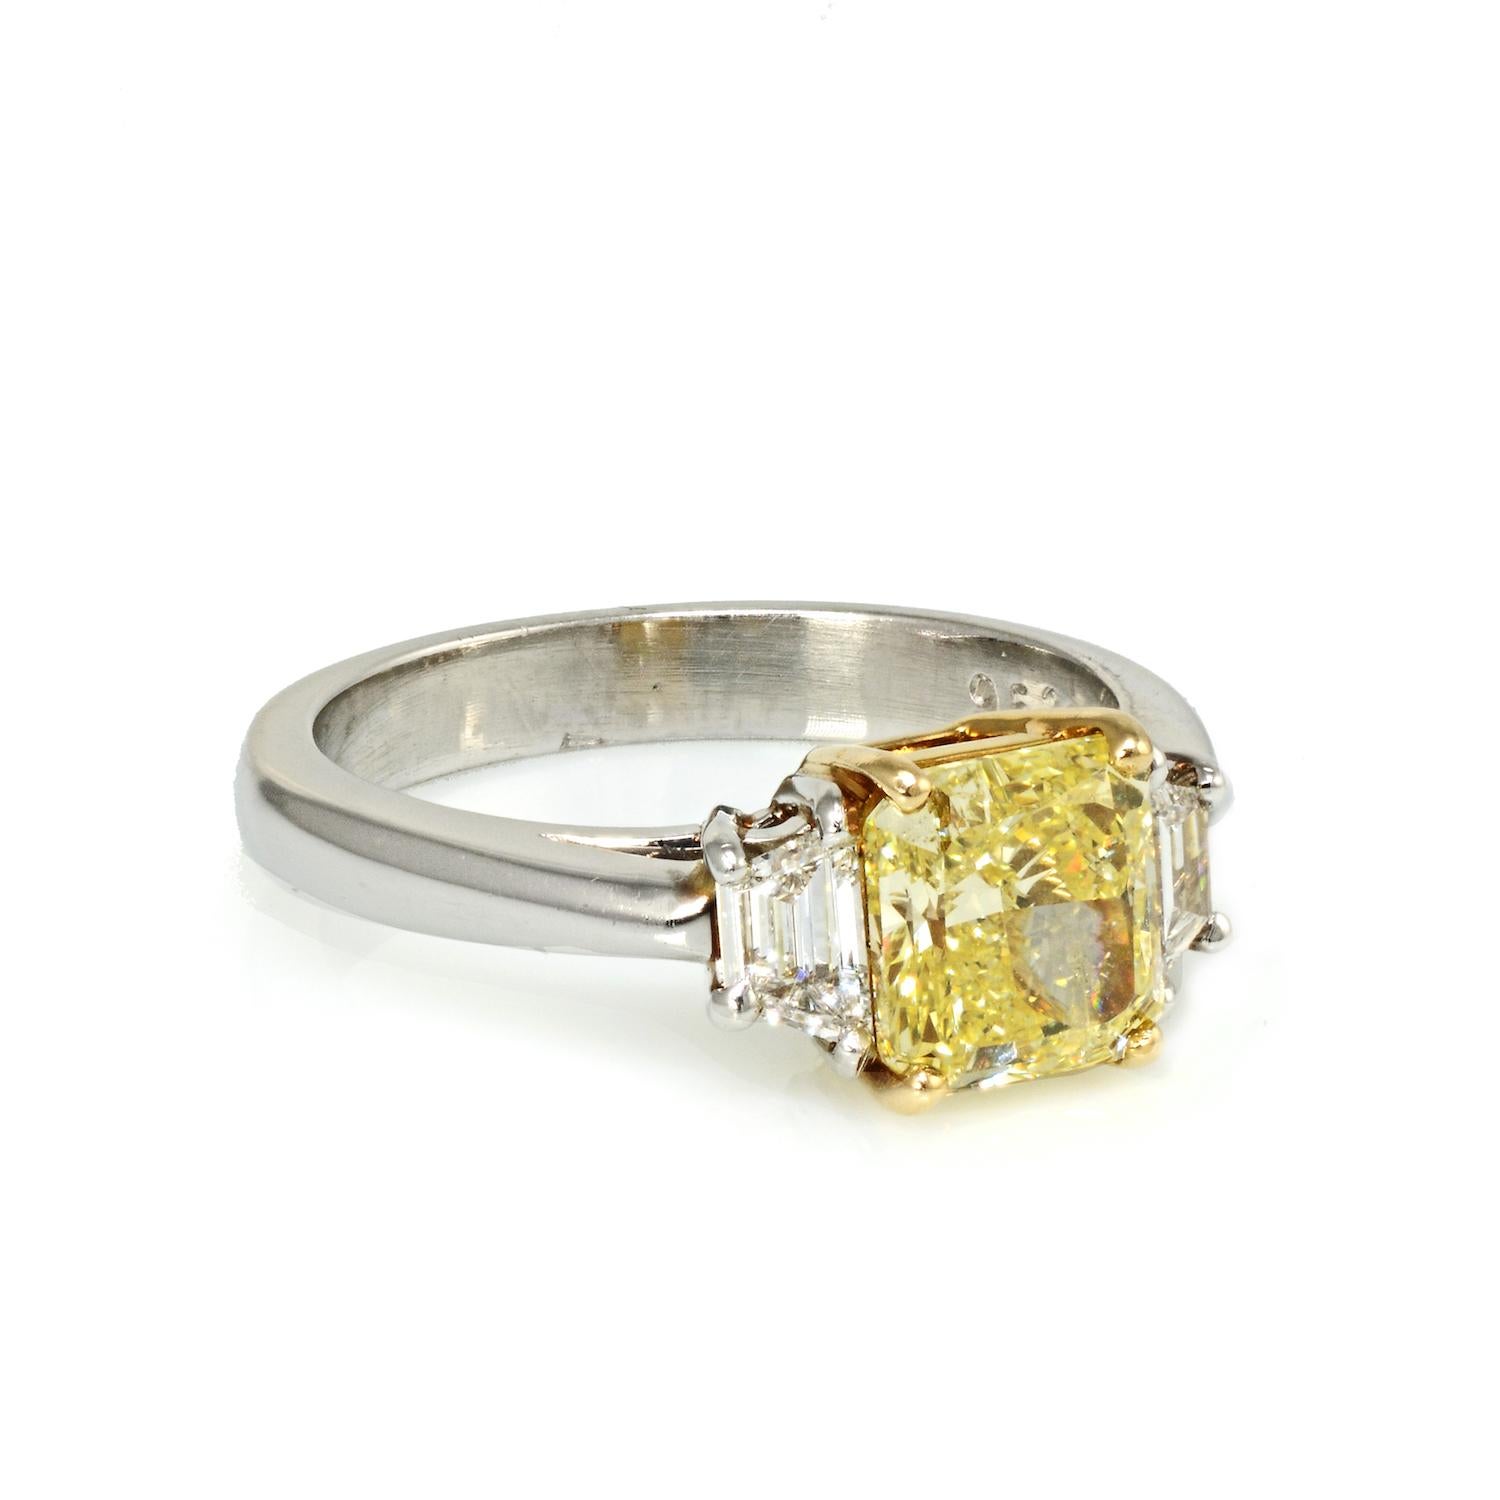 Ladies beautiful platinum and yellow gold three stone diamond ring featuring a 1.60 carat Radiant-cut diamond of Fancy Intense Yellow color. The center stone is flanked by trapezoid cut diamonds weighing approximately 0.32 carats total weight of